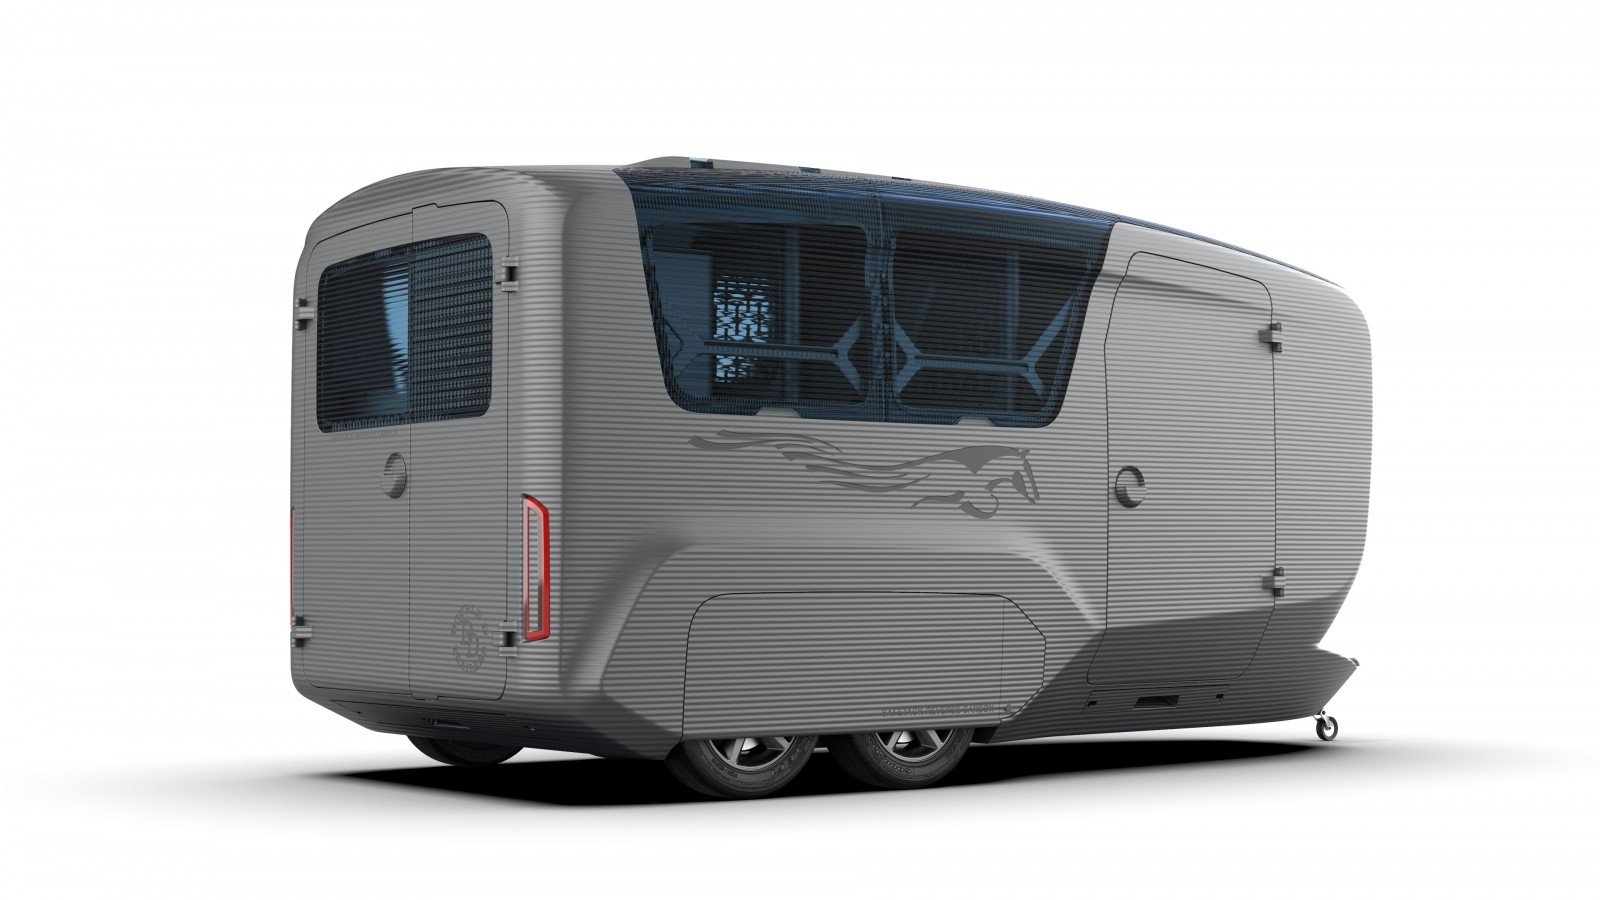 A side view of the 3D printed horse trailer design by Double D Trailers. 